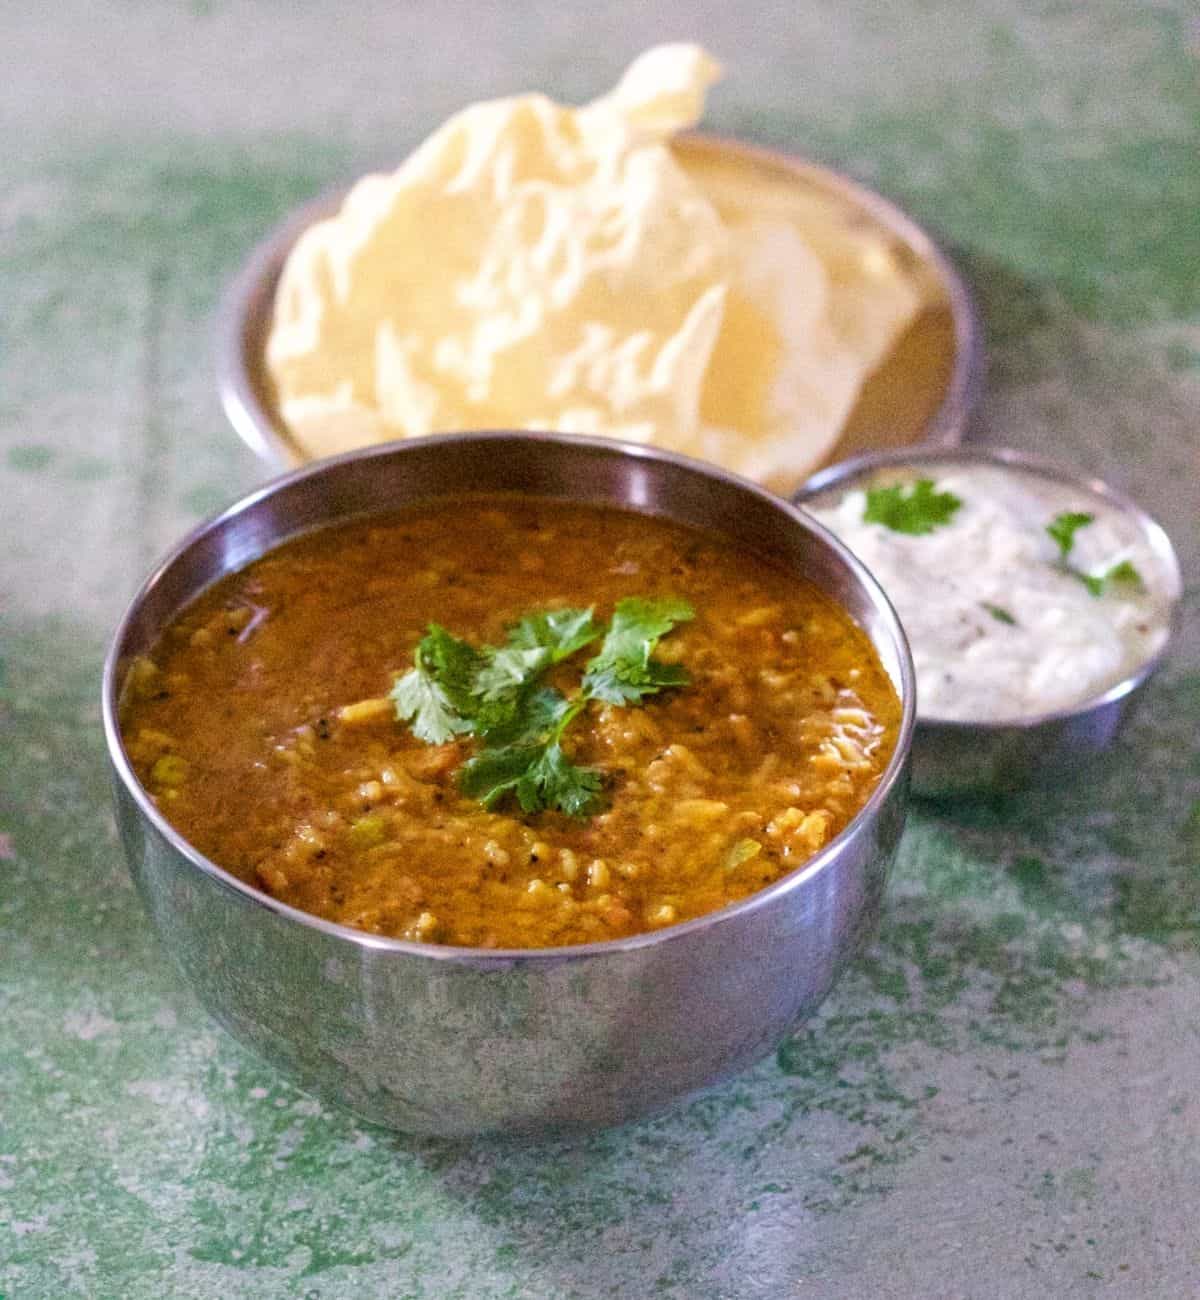 Large steel bowl filled with brownish yellow bisi bele huli anna, a rice and lentils spiced mix. Garnished with green coriander leaves. Plate of fried appalam/pappad in the background and a bowl of curd pachadi/ raita to the right. On a green and white background